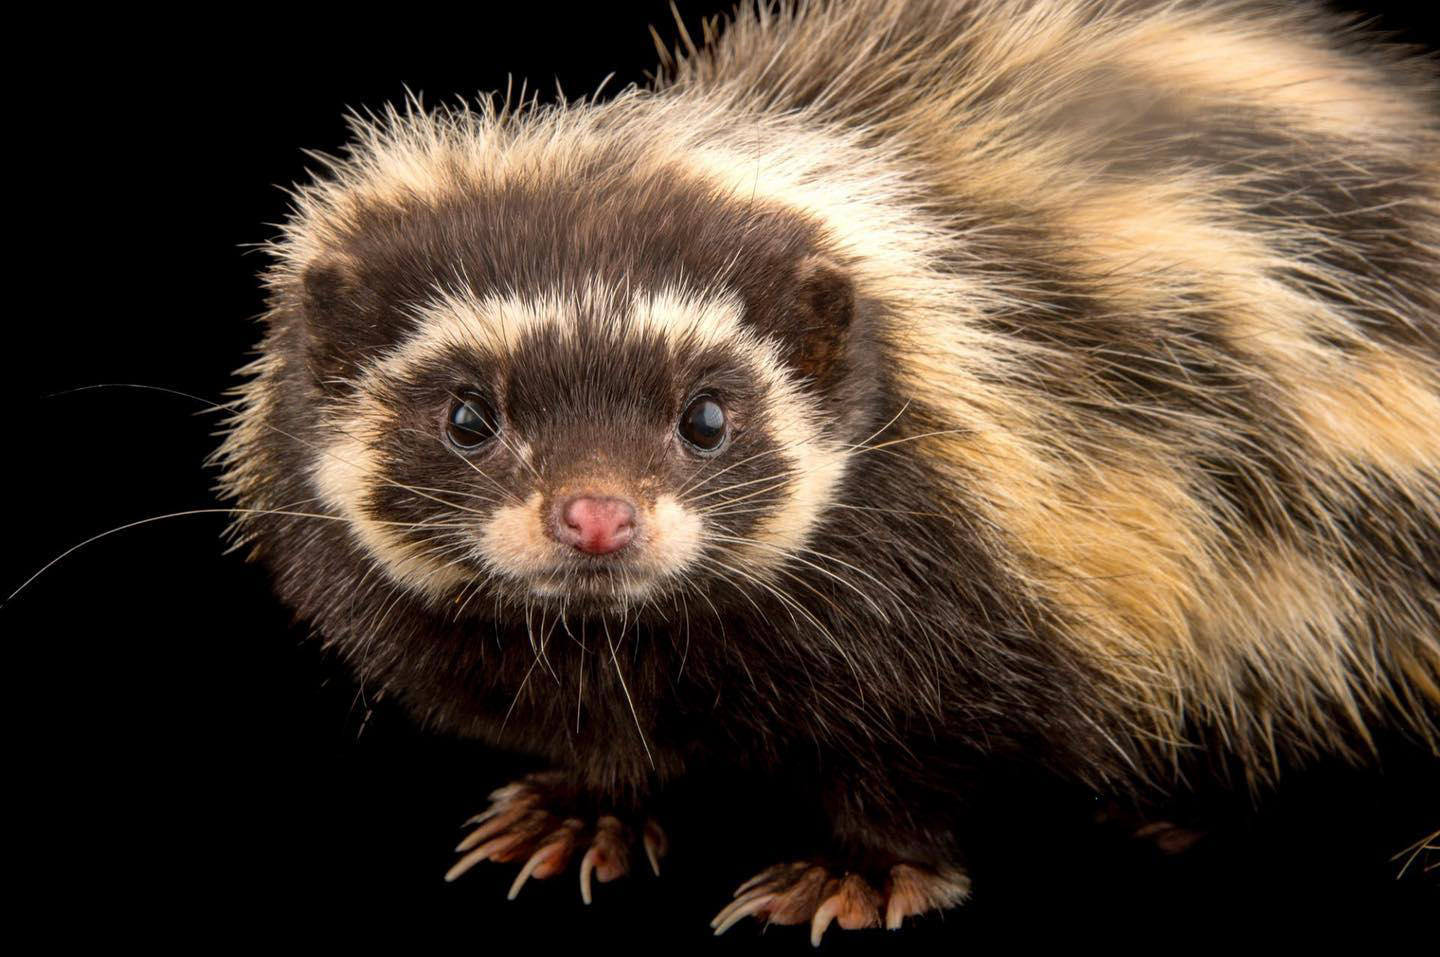 Joel Sartore- Photo Ark - Saharan striped polecats like this one #zooplzen thrive across much of Nor